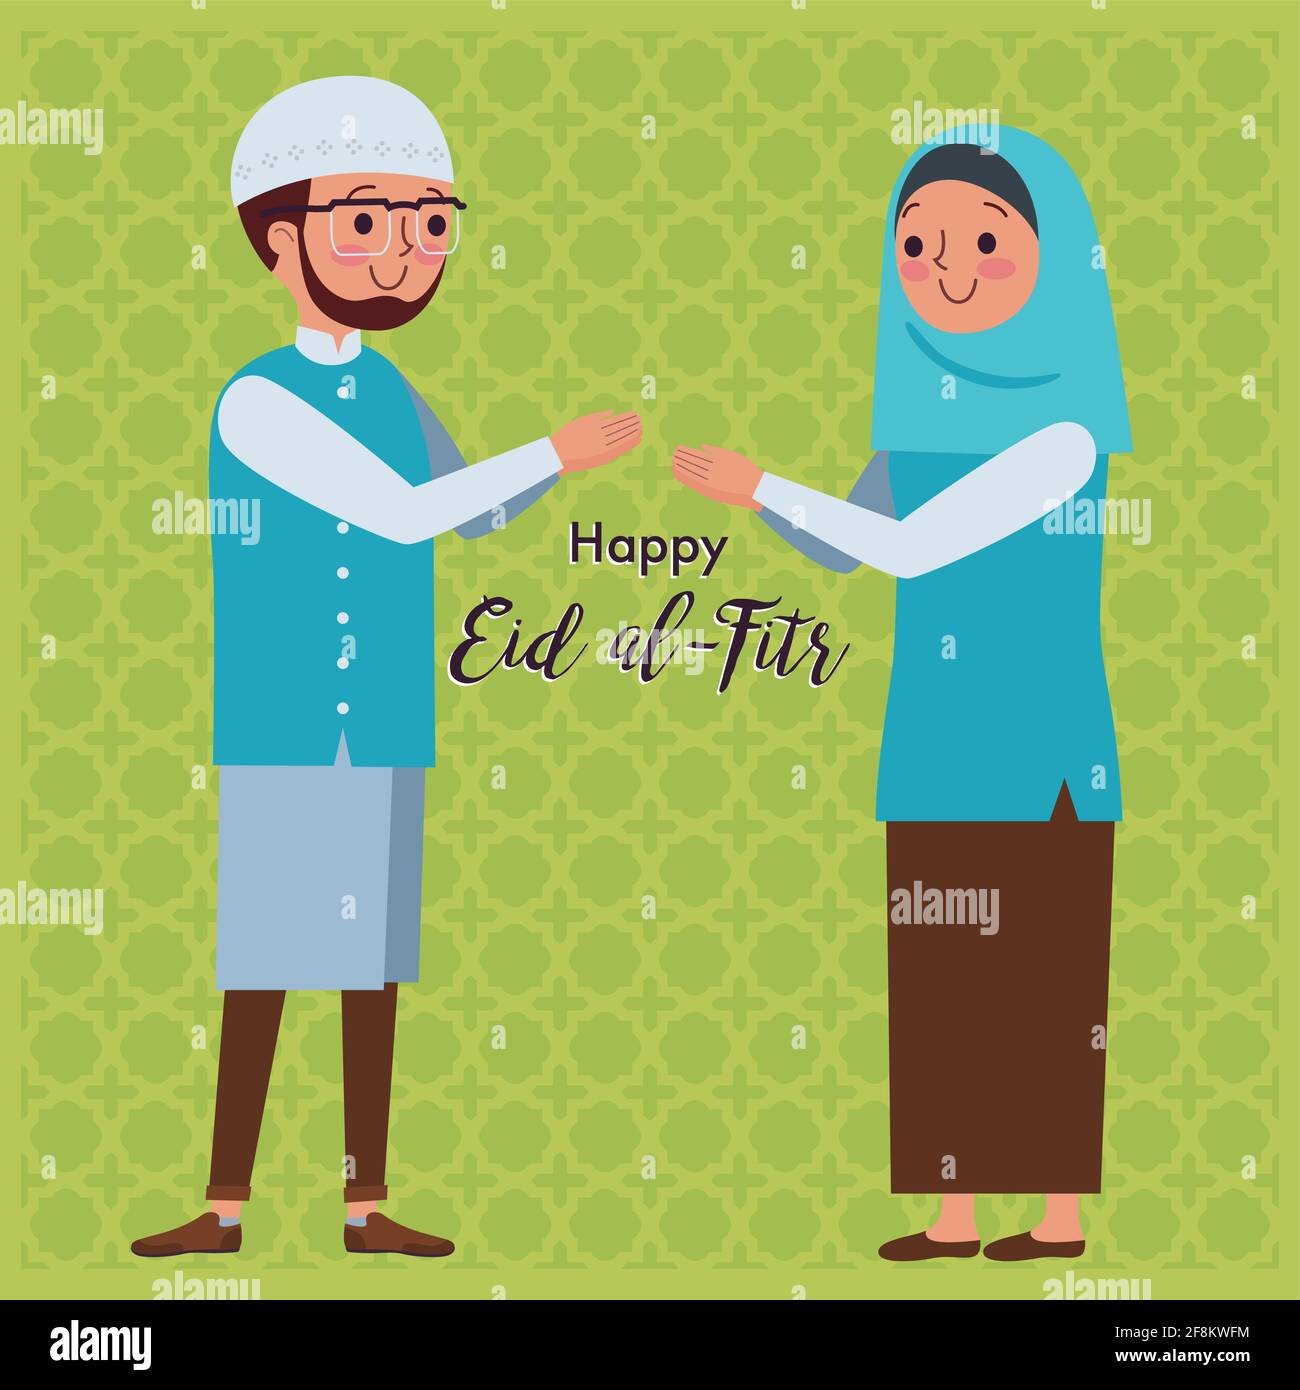 Muslim couple are shaking hands to forgive each other to welcome the eid al-Fitr. Stock Vector